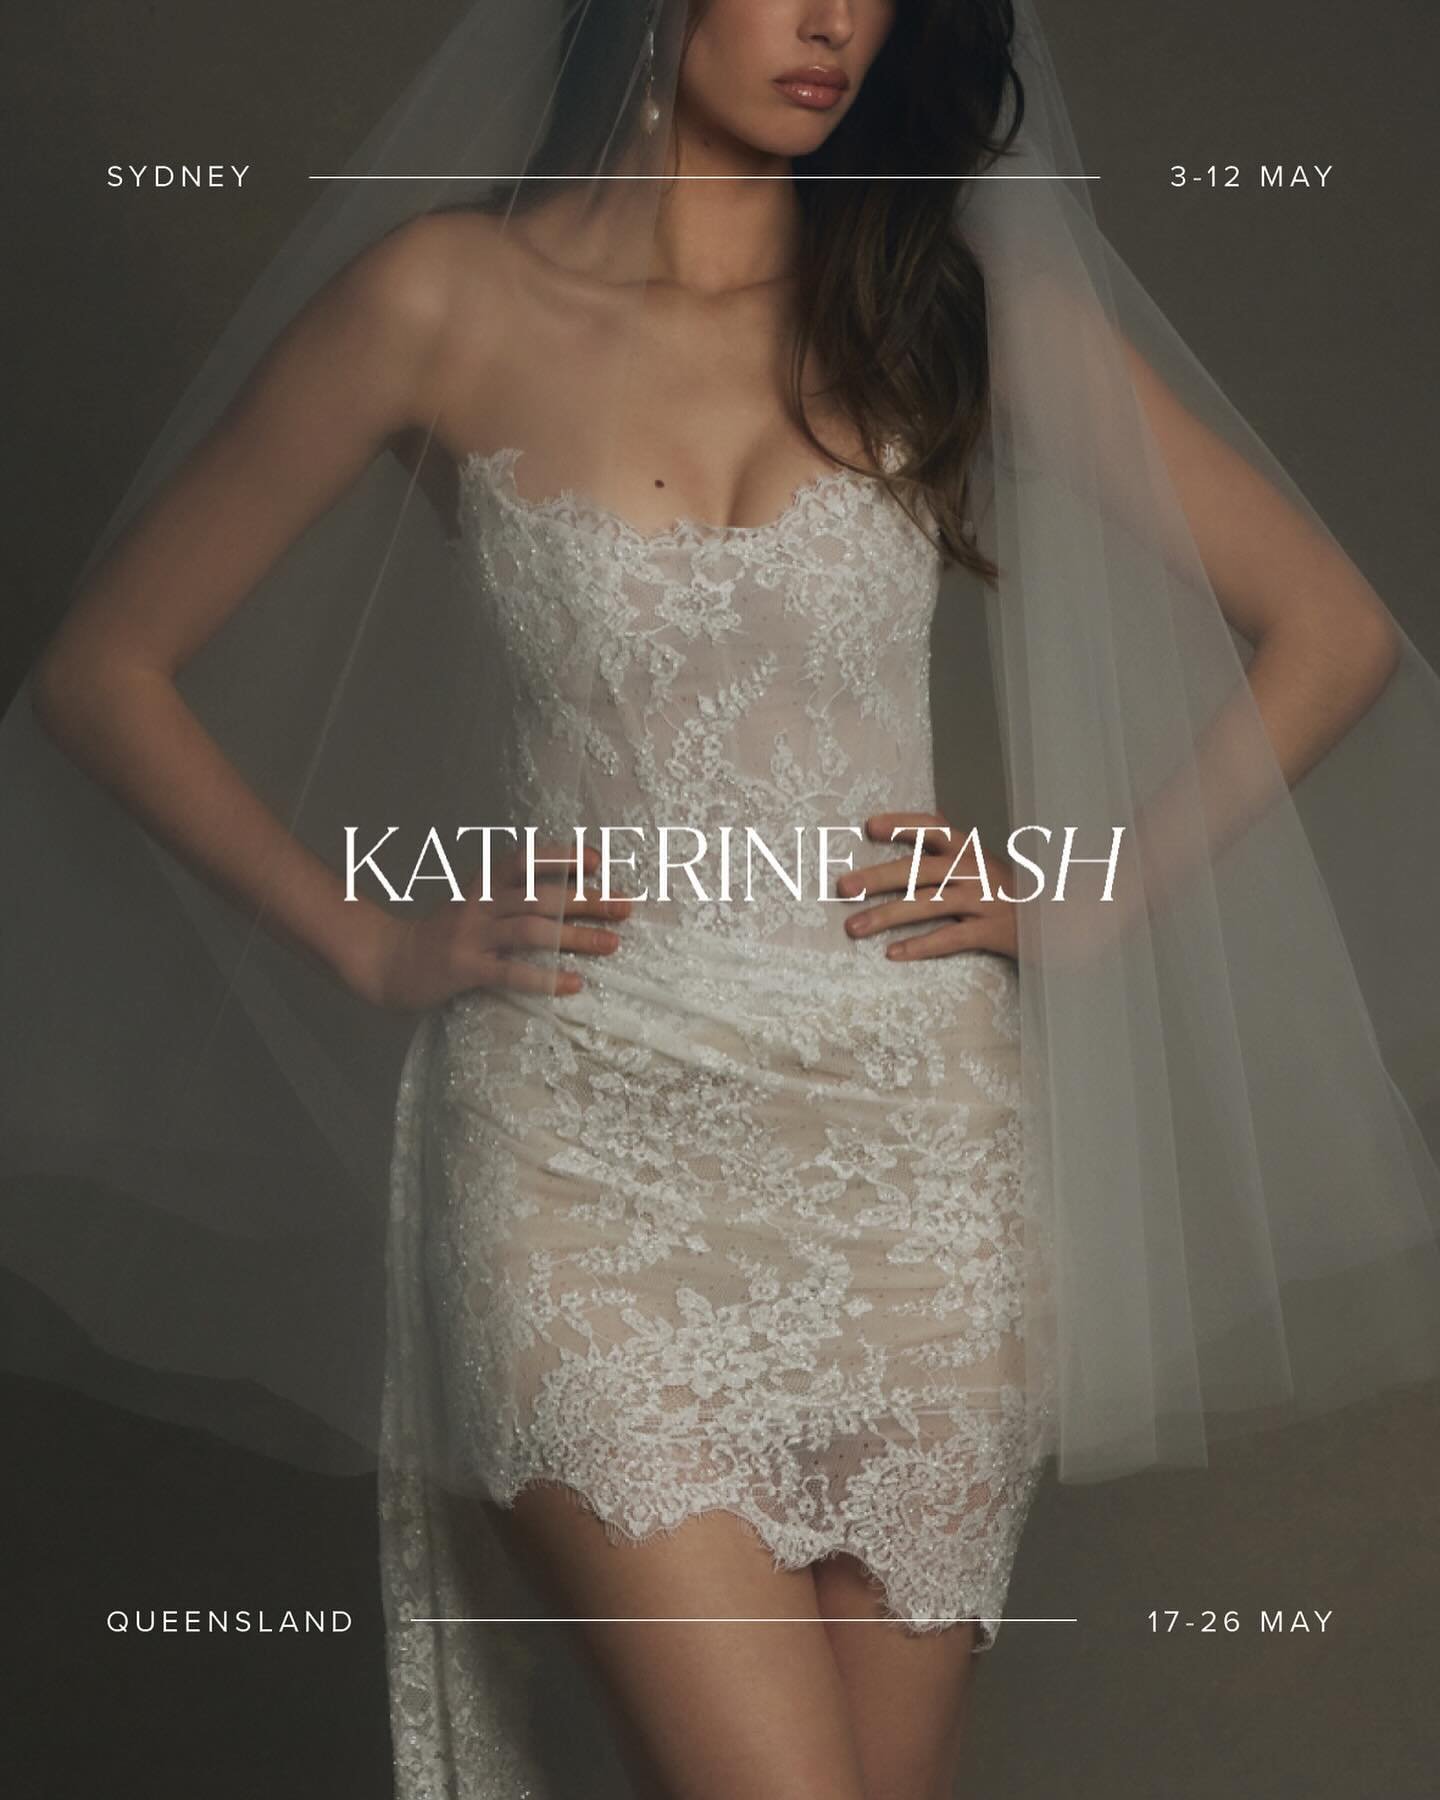 KATHERINE TASH TRUNK SHOW &mdash;&mdash; The new @katherinetash Paradise &lsquo;25 collection exclusively coming to Sphere Bridal Gallery for a series of Australian trunk shows. Be the first to explore, try-on and order from the Paradise &lsquo;25 co